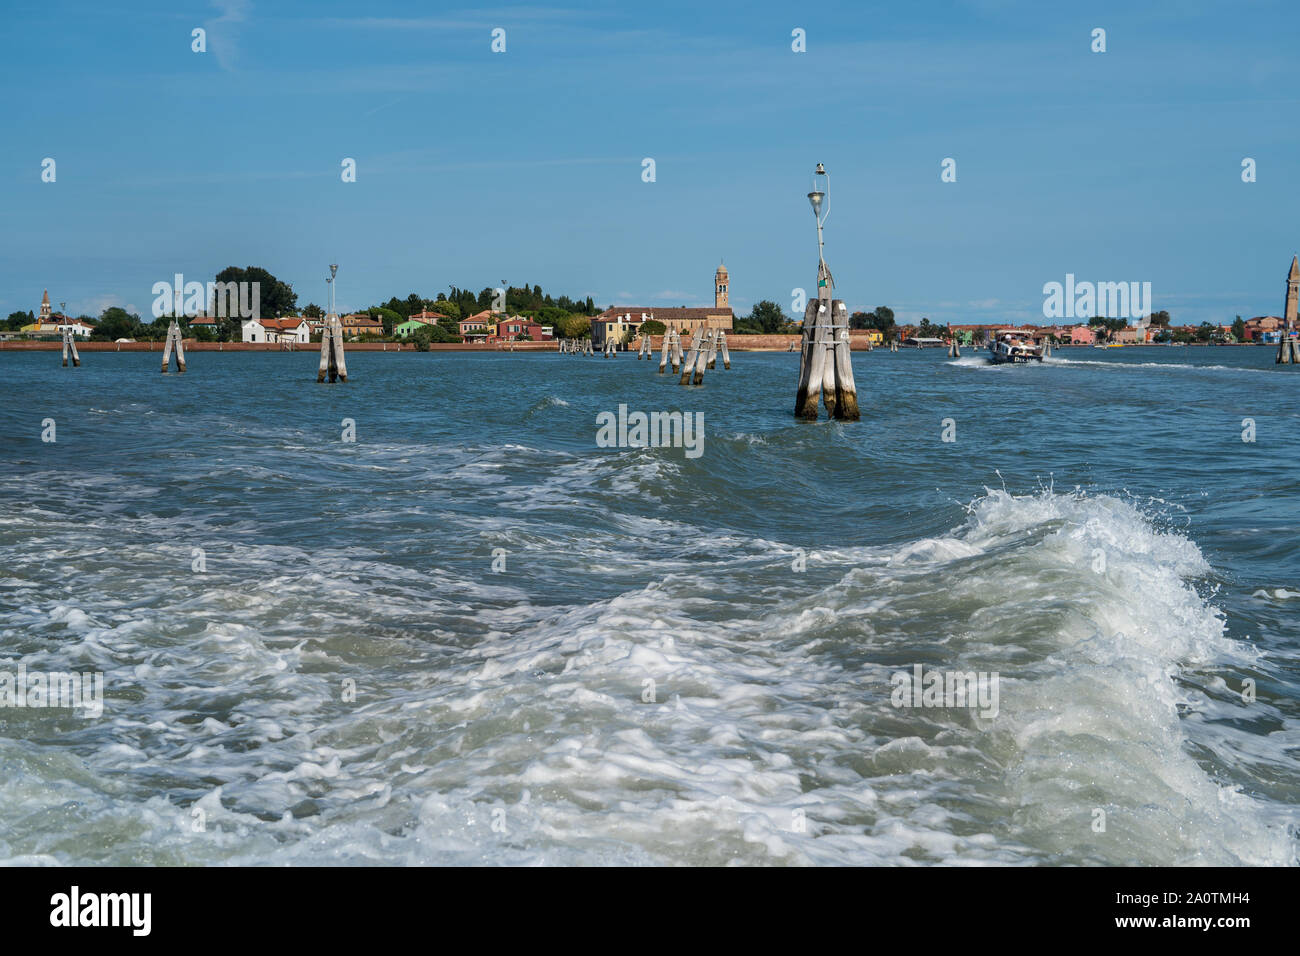 The lagoon between Venice and the islands of Murano and Burano Stock Photo